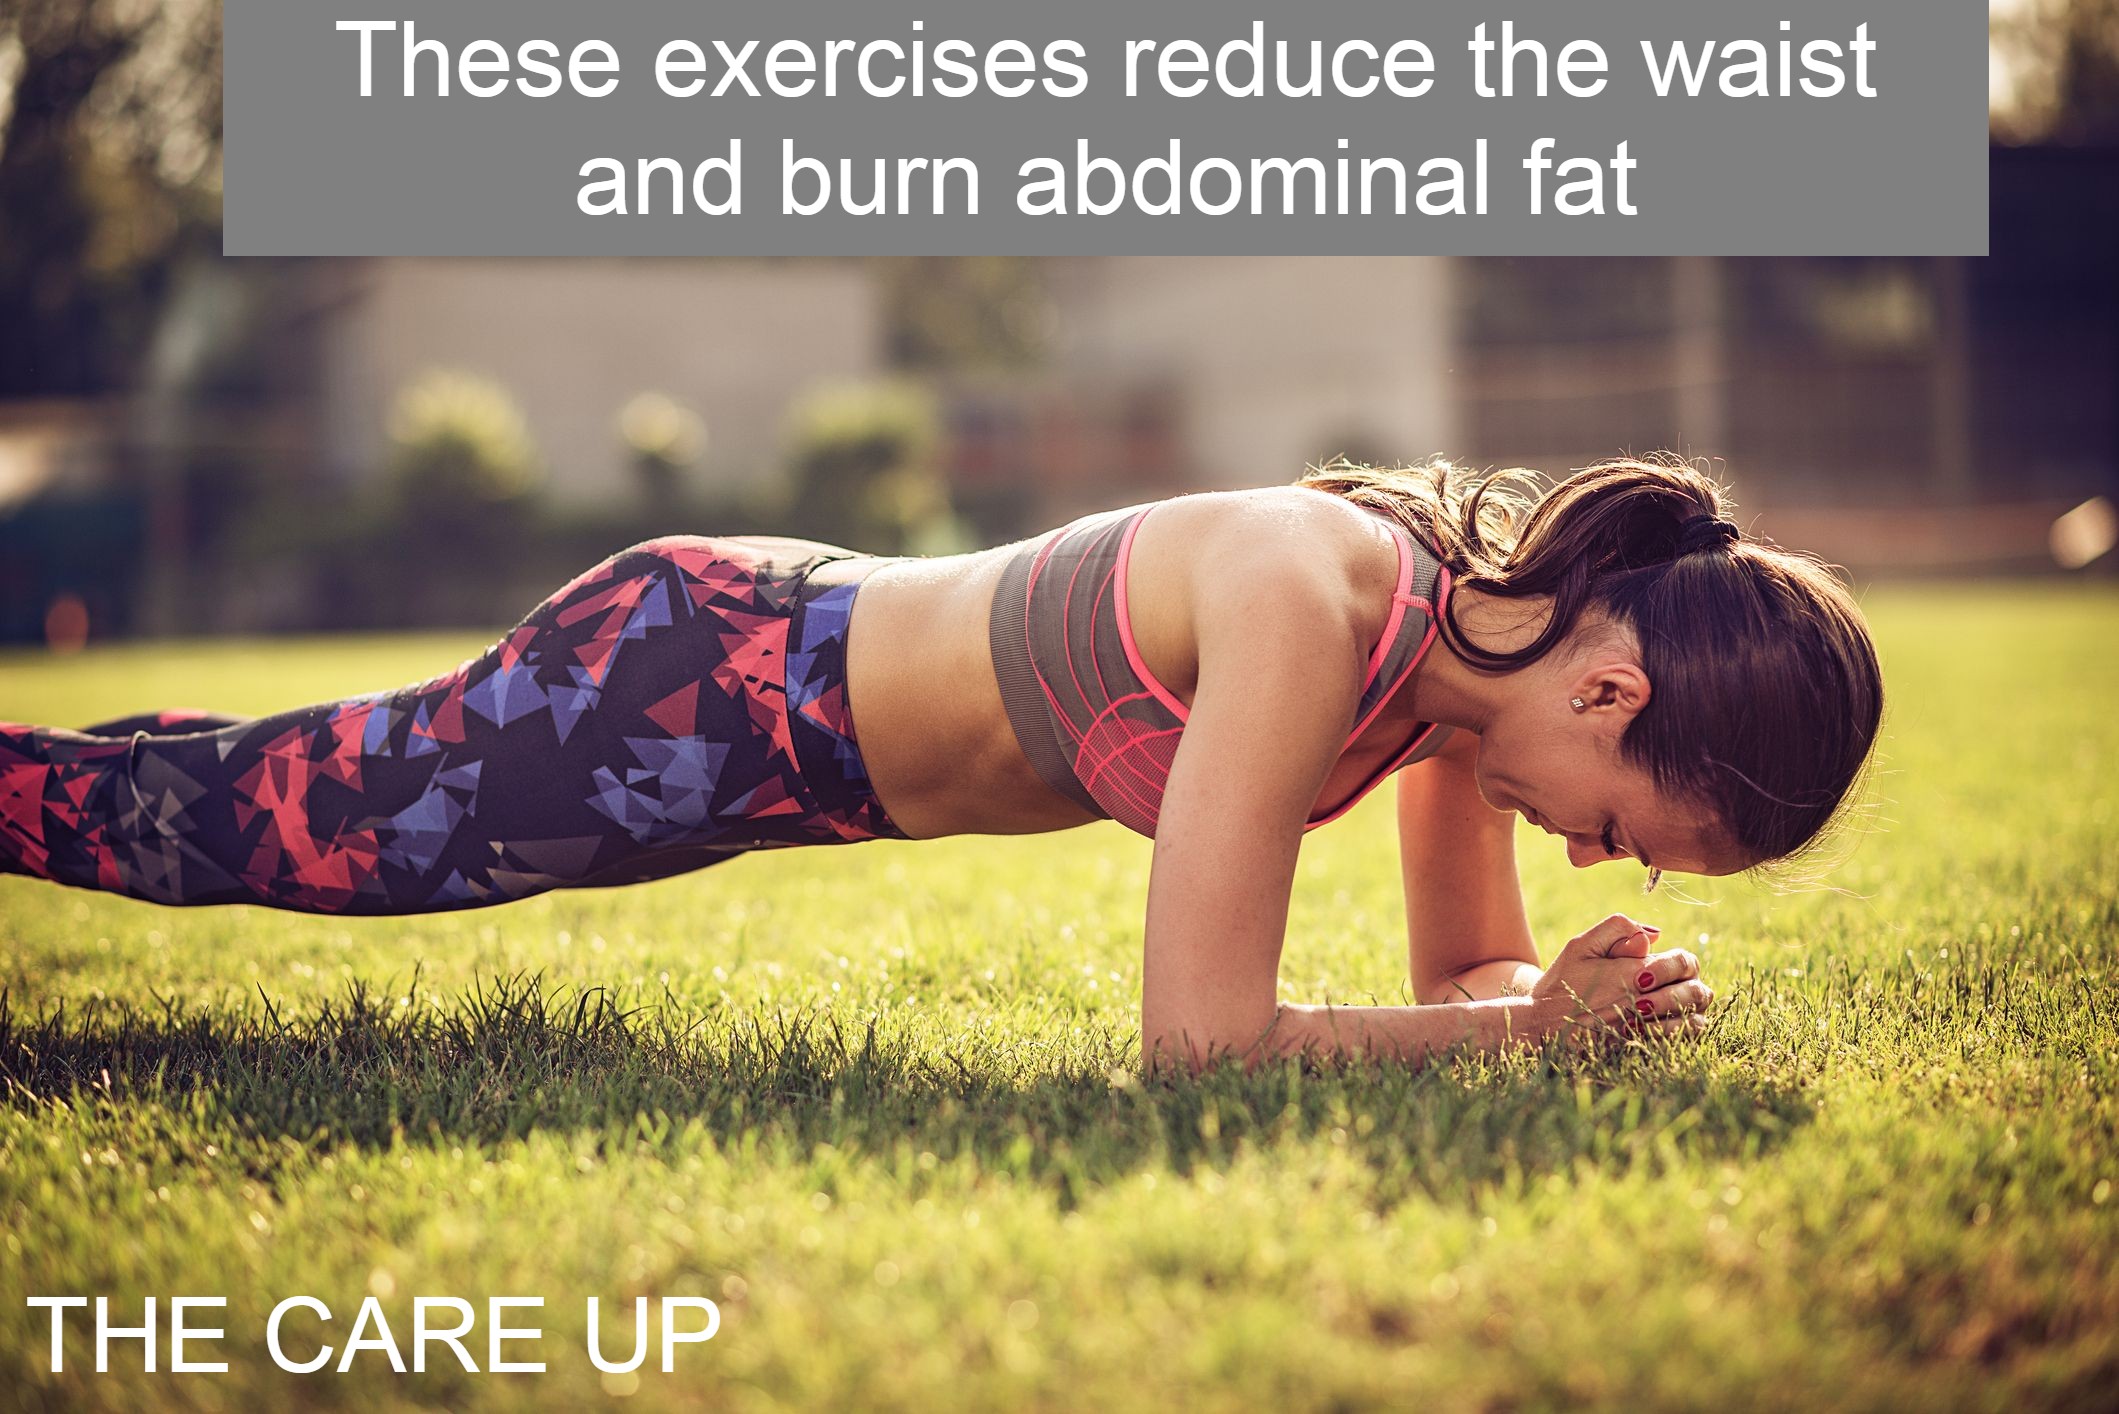 These exercises reduce the waist and burn abdominal fat